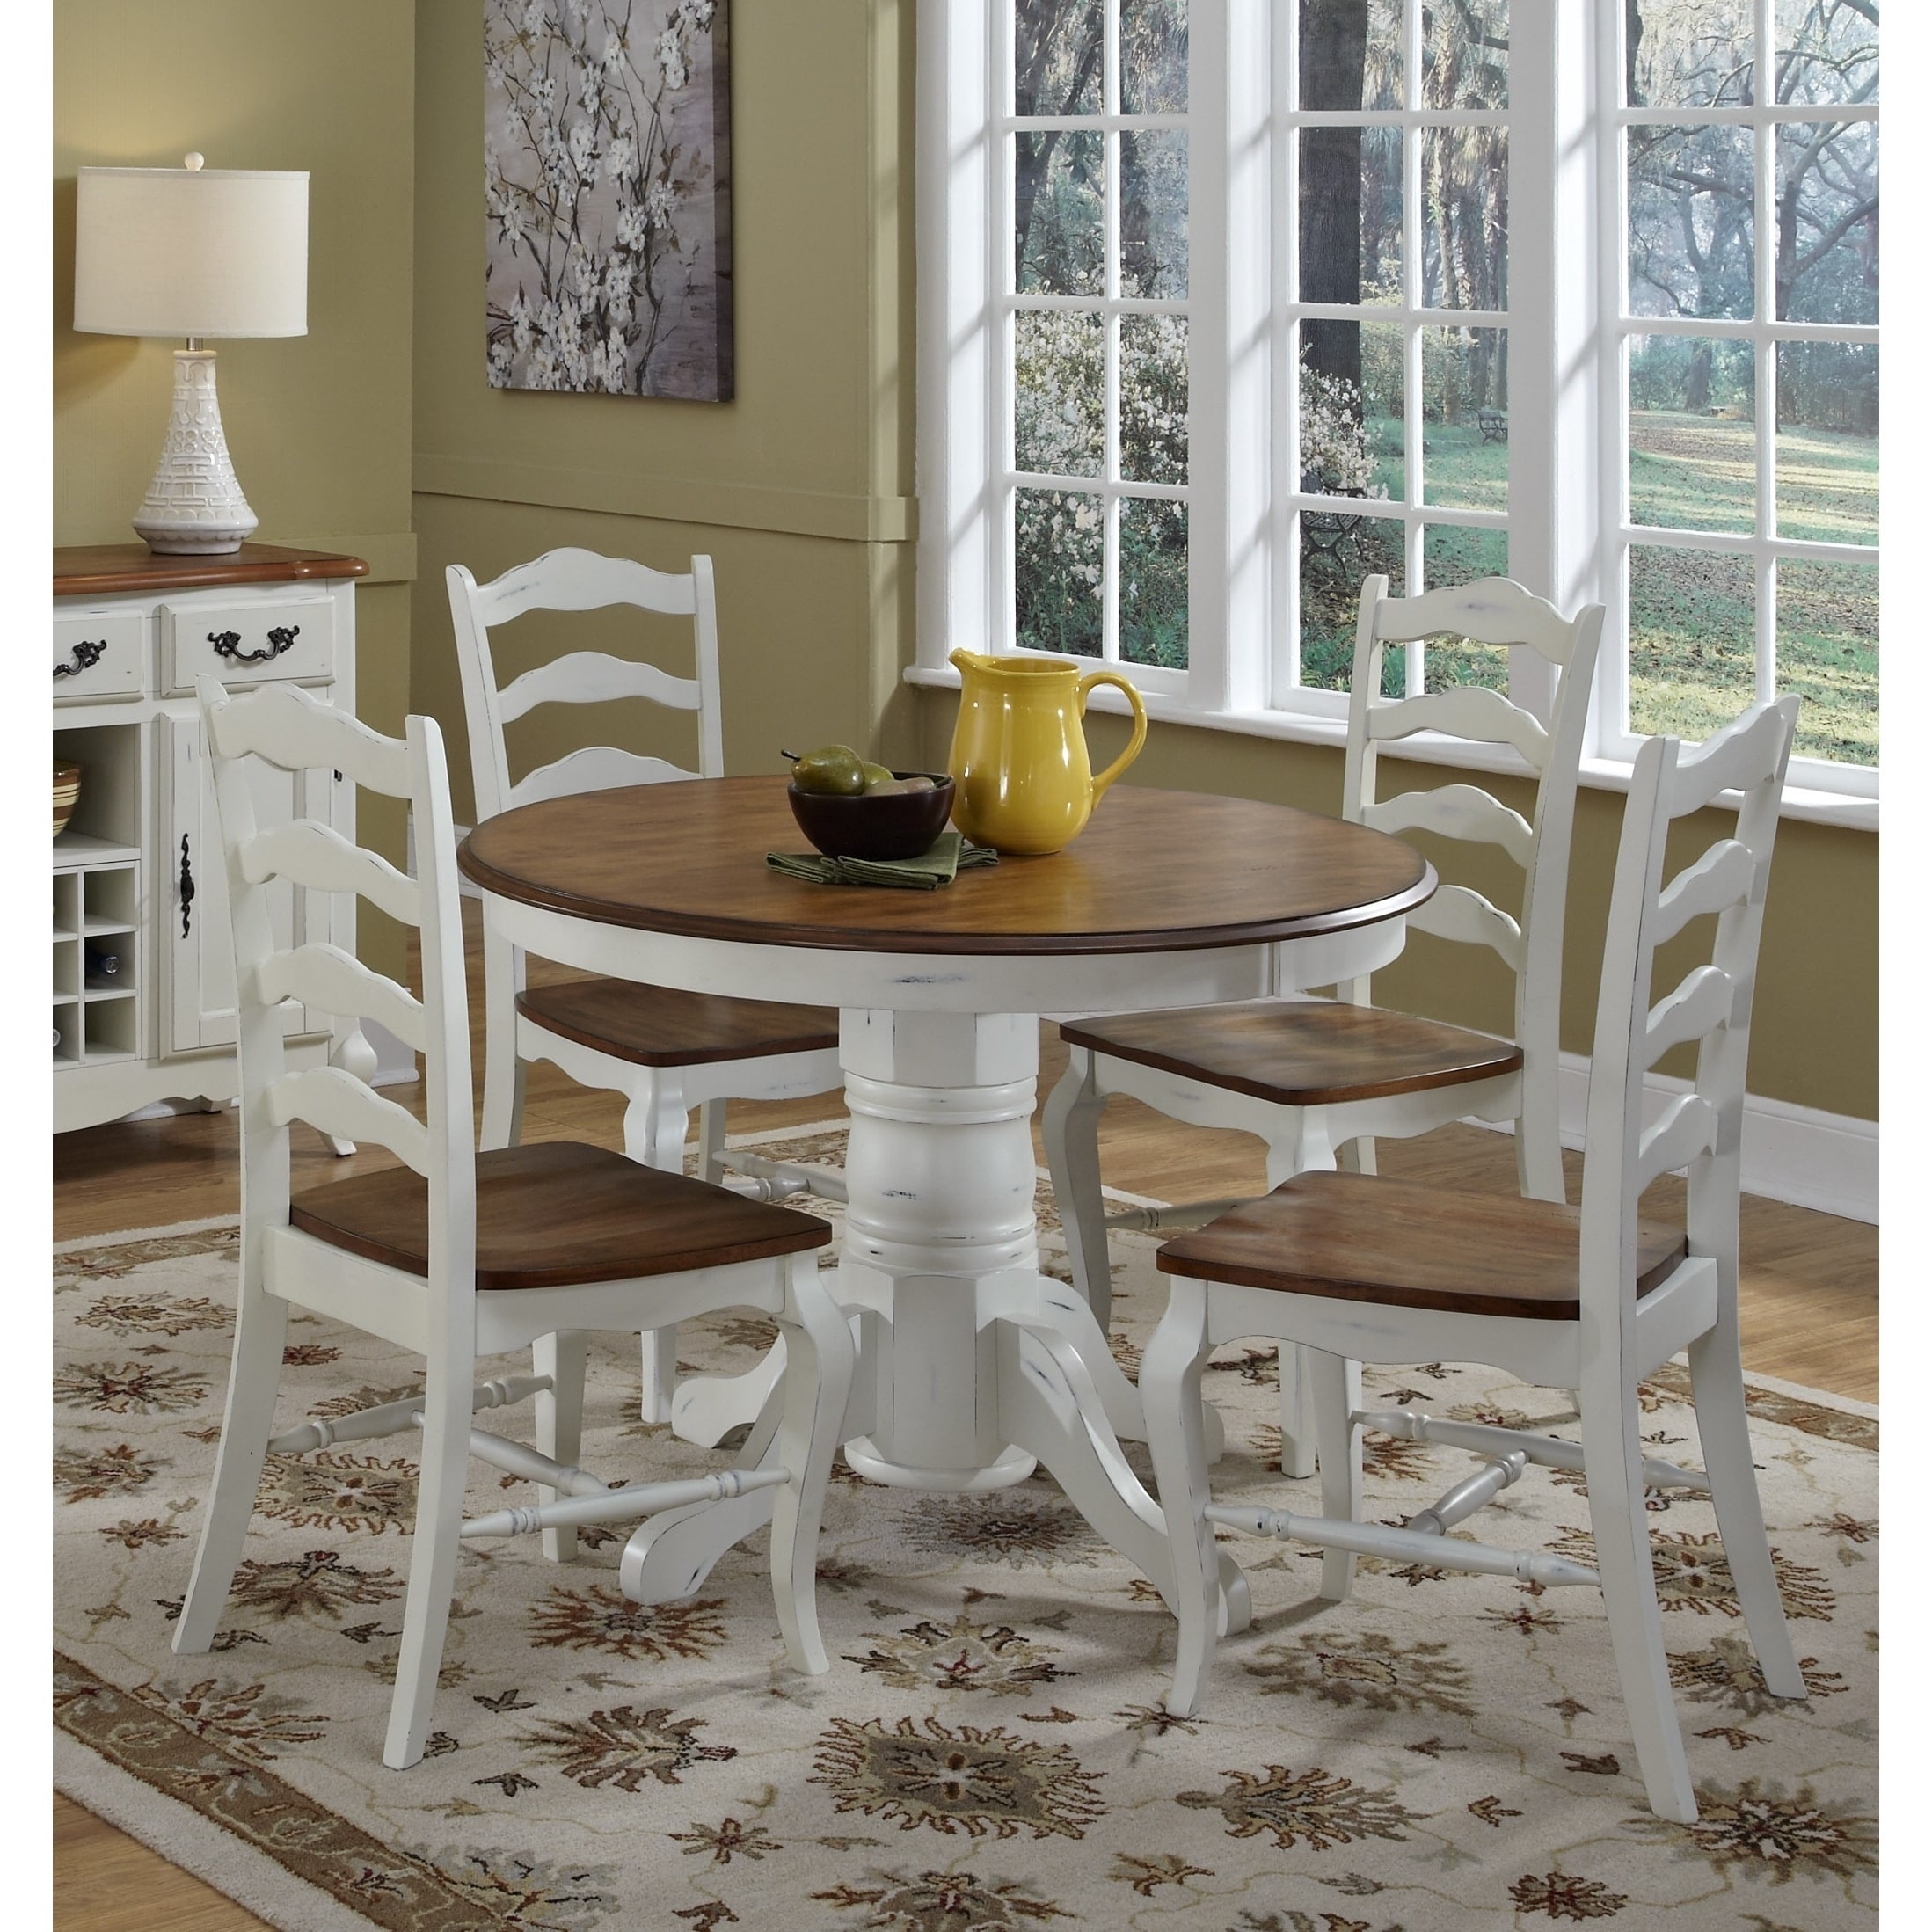 French Countryside 5 Piece Dining Set